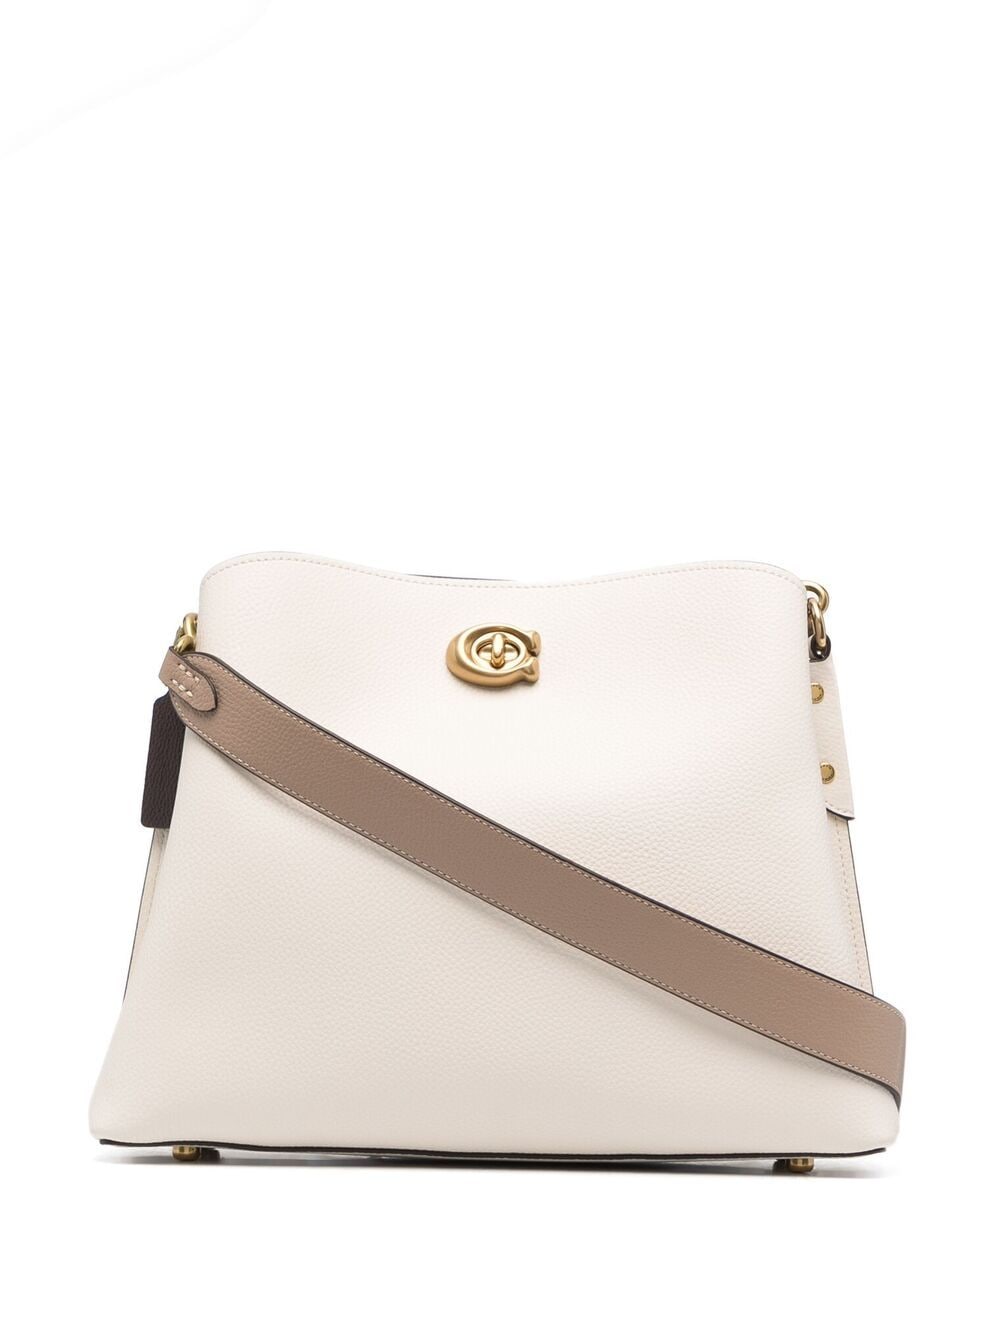 Coach Willow Leather Shoulder Bag - Farfetch